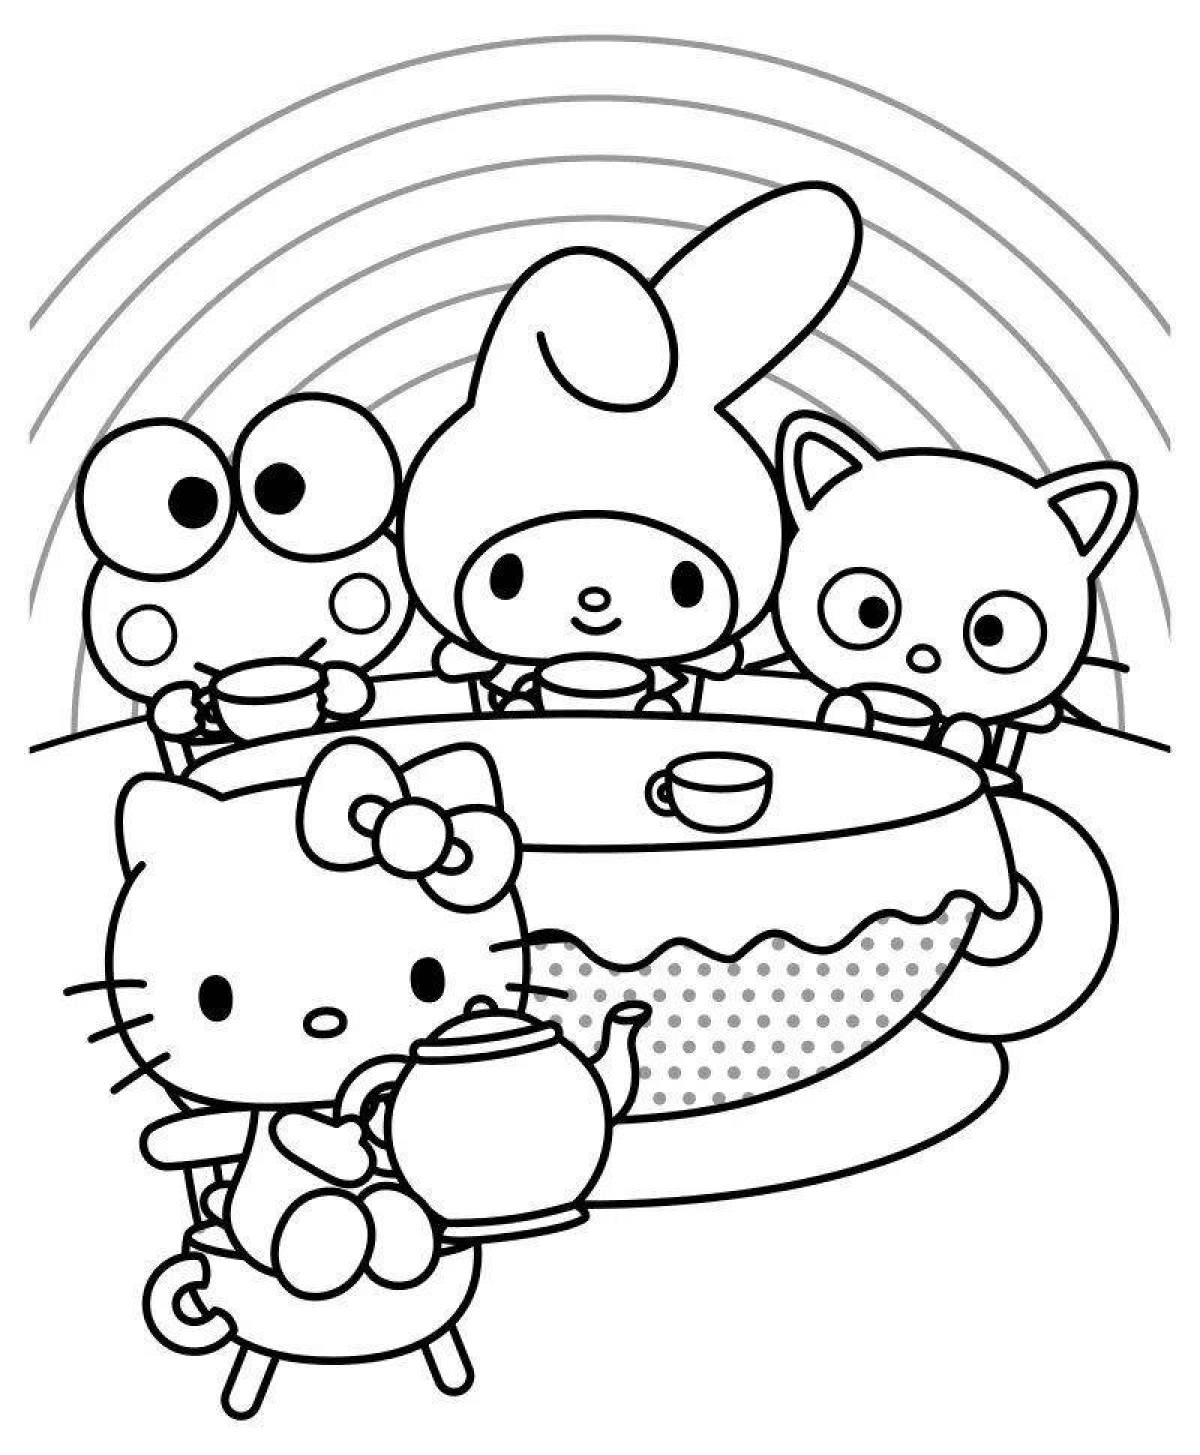 Cute chicks and hello kitty coloring book